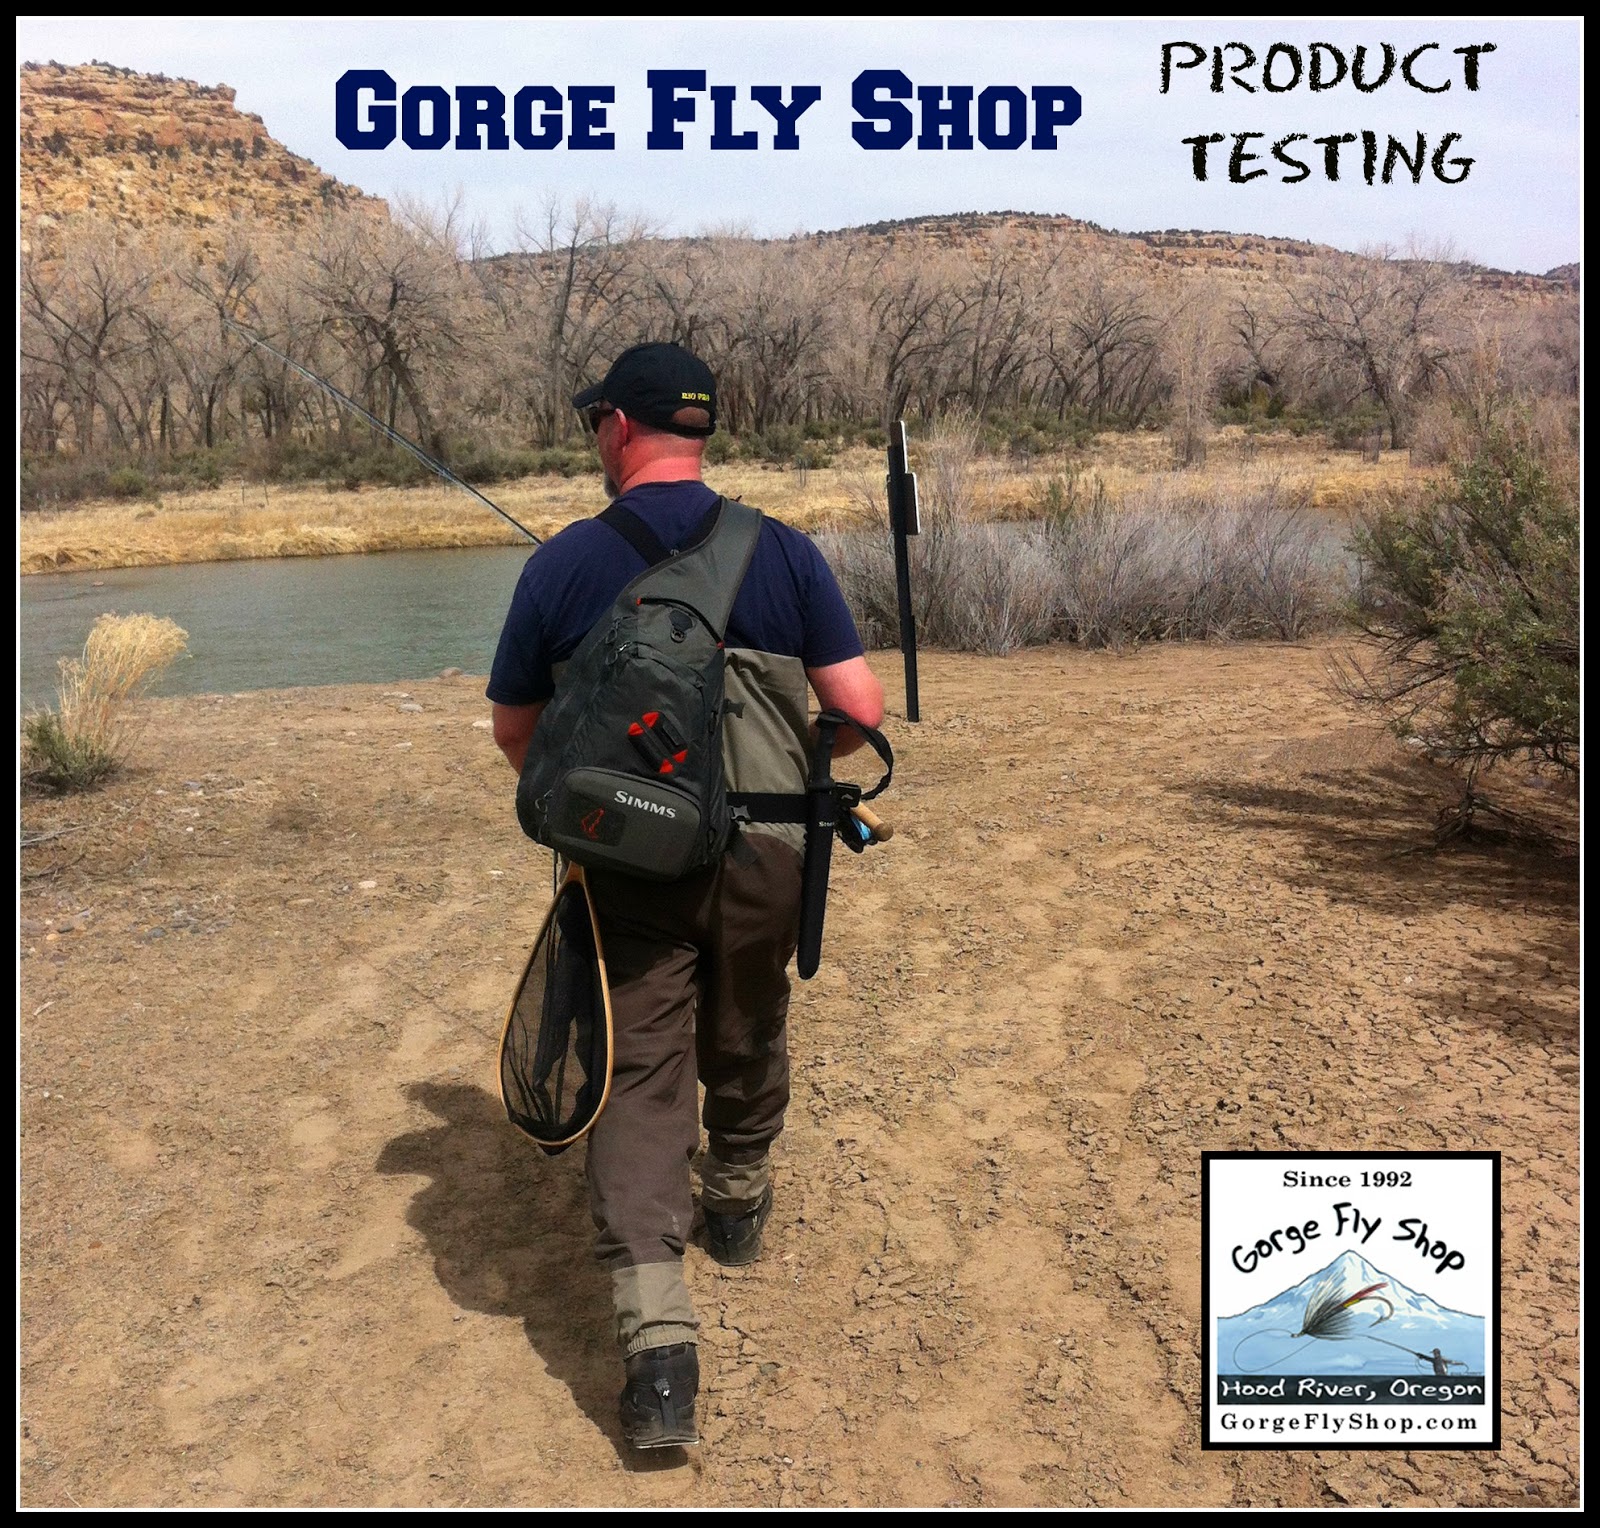 Gorge Fly Shop Blog: Simms Headwaters Sling Pack: Reviews are over